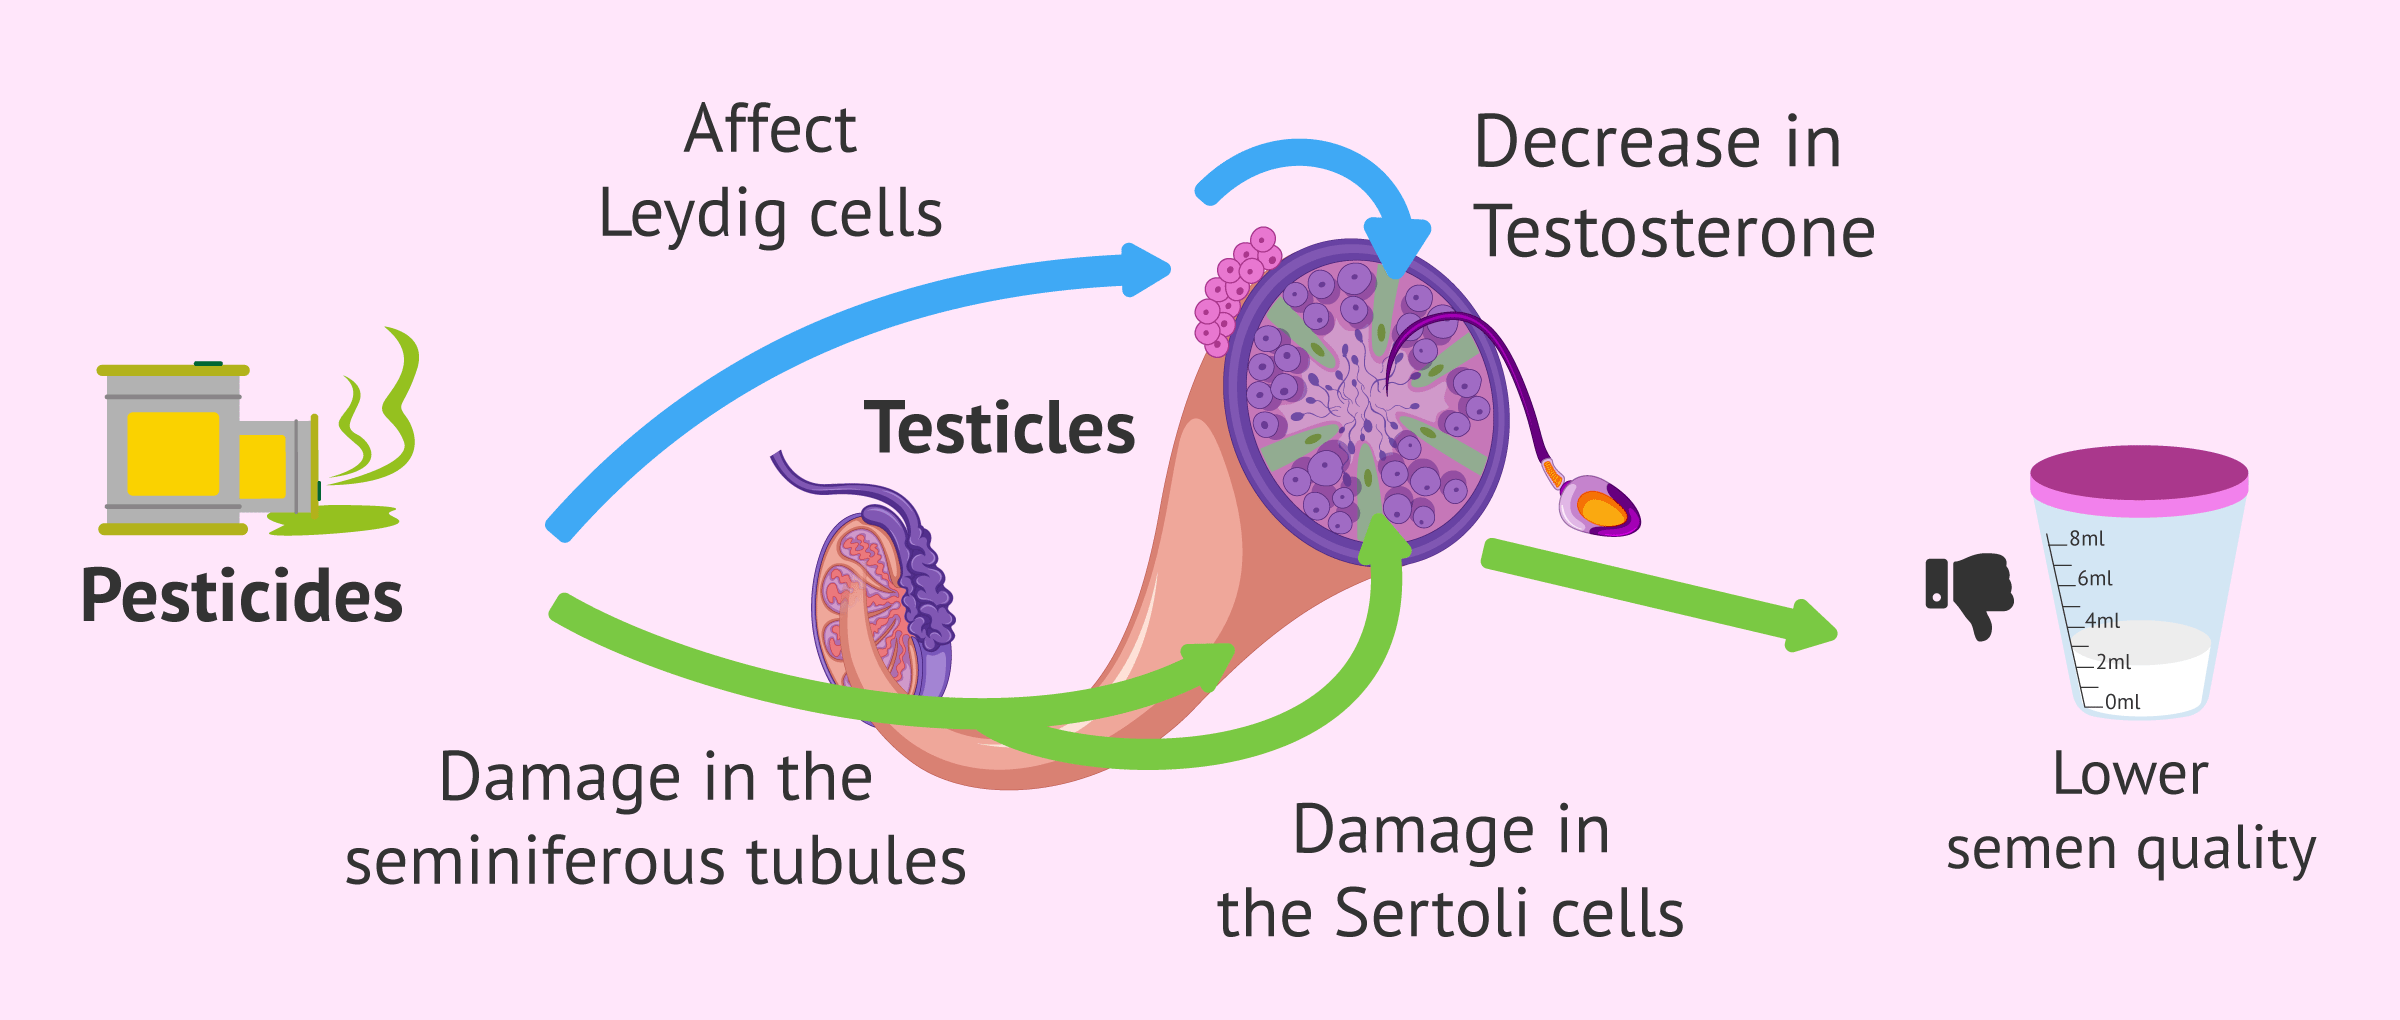 effects-of-pesticides-on-male-fertility.png